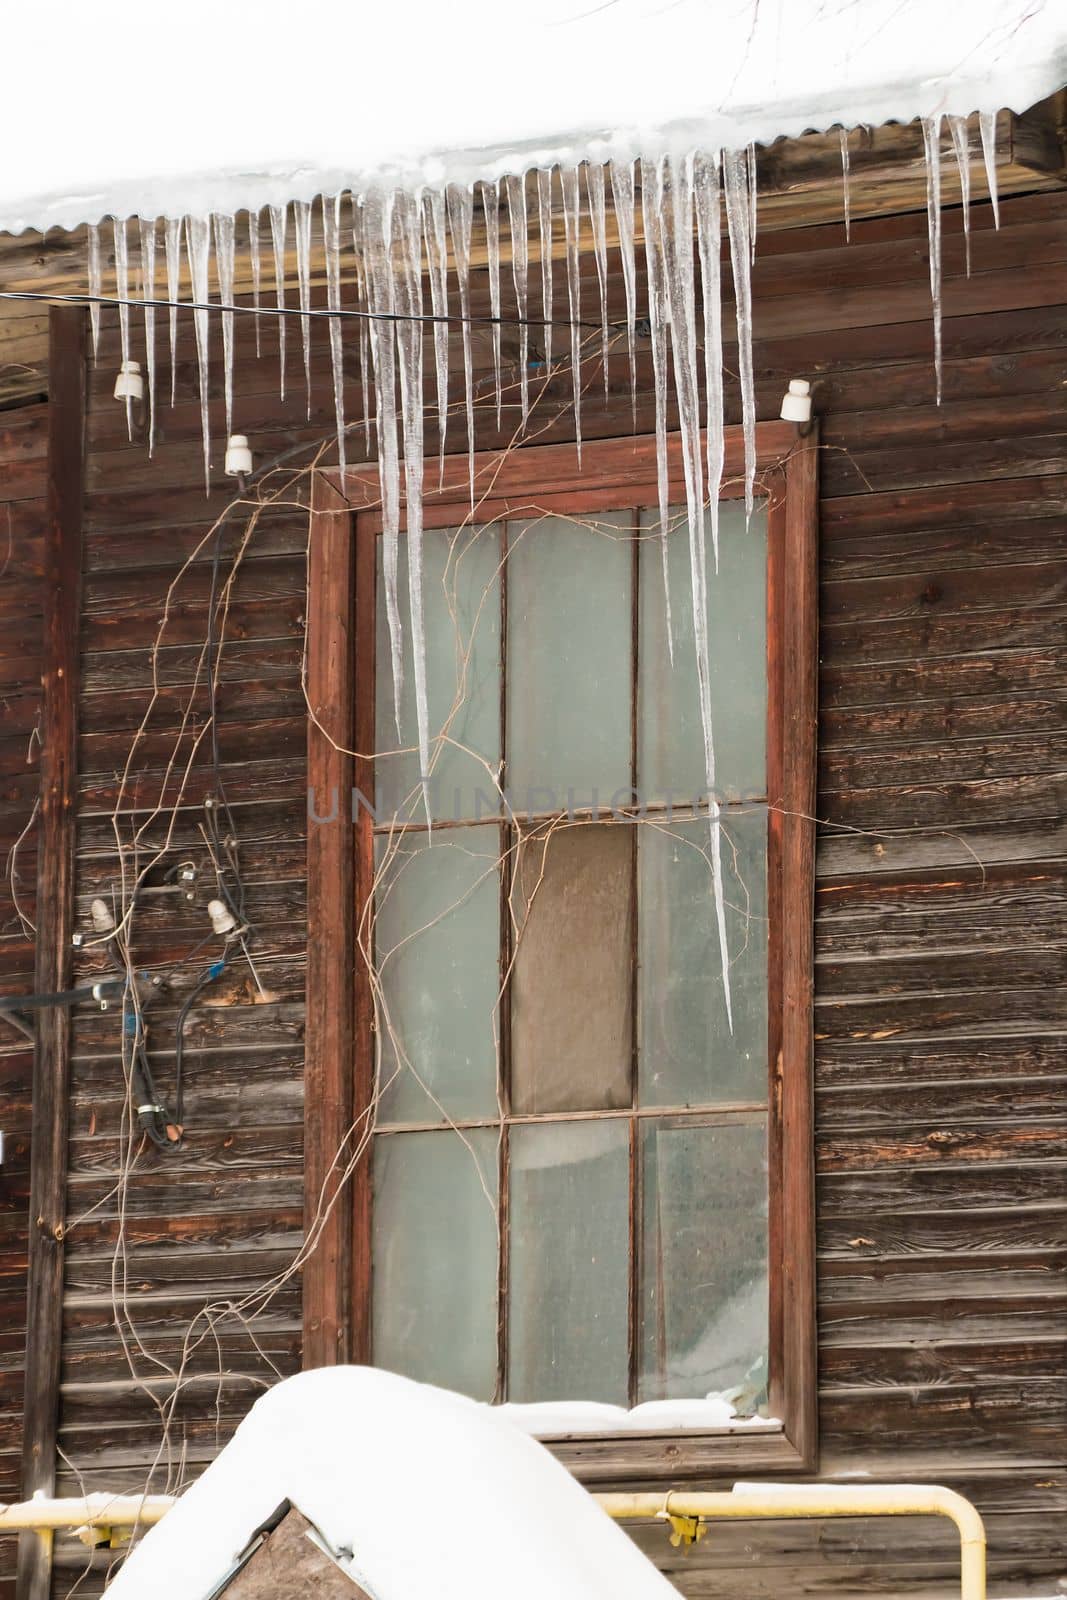 Small icicles hang on the edge of the roof, winter or spring. Log wall of an old wooden house with windows. Large cascades of icicles in smooth, beautiful rows. Cloudy winter day, soft light.